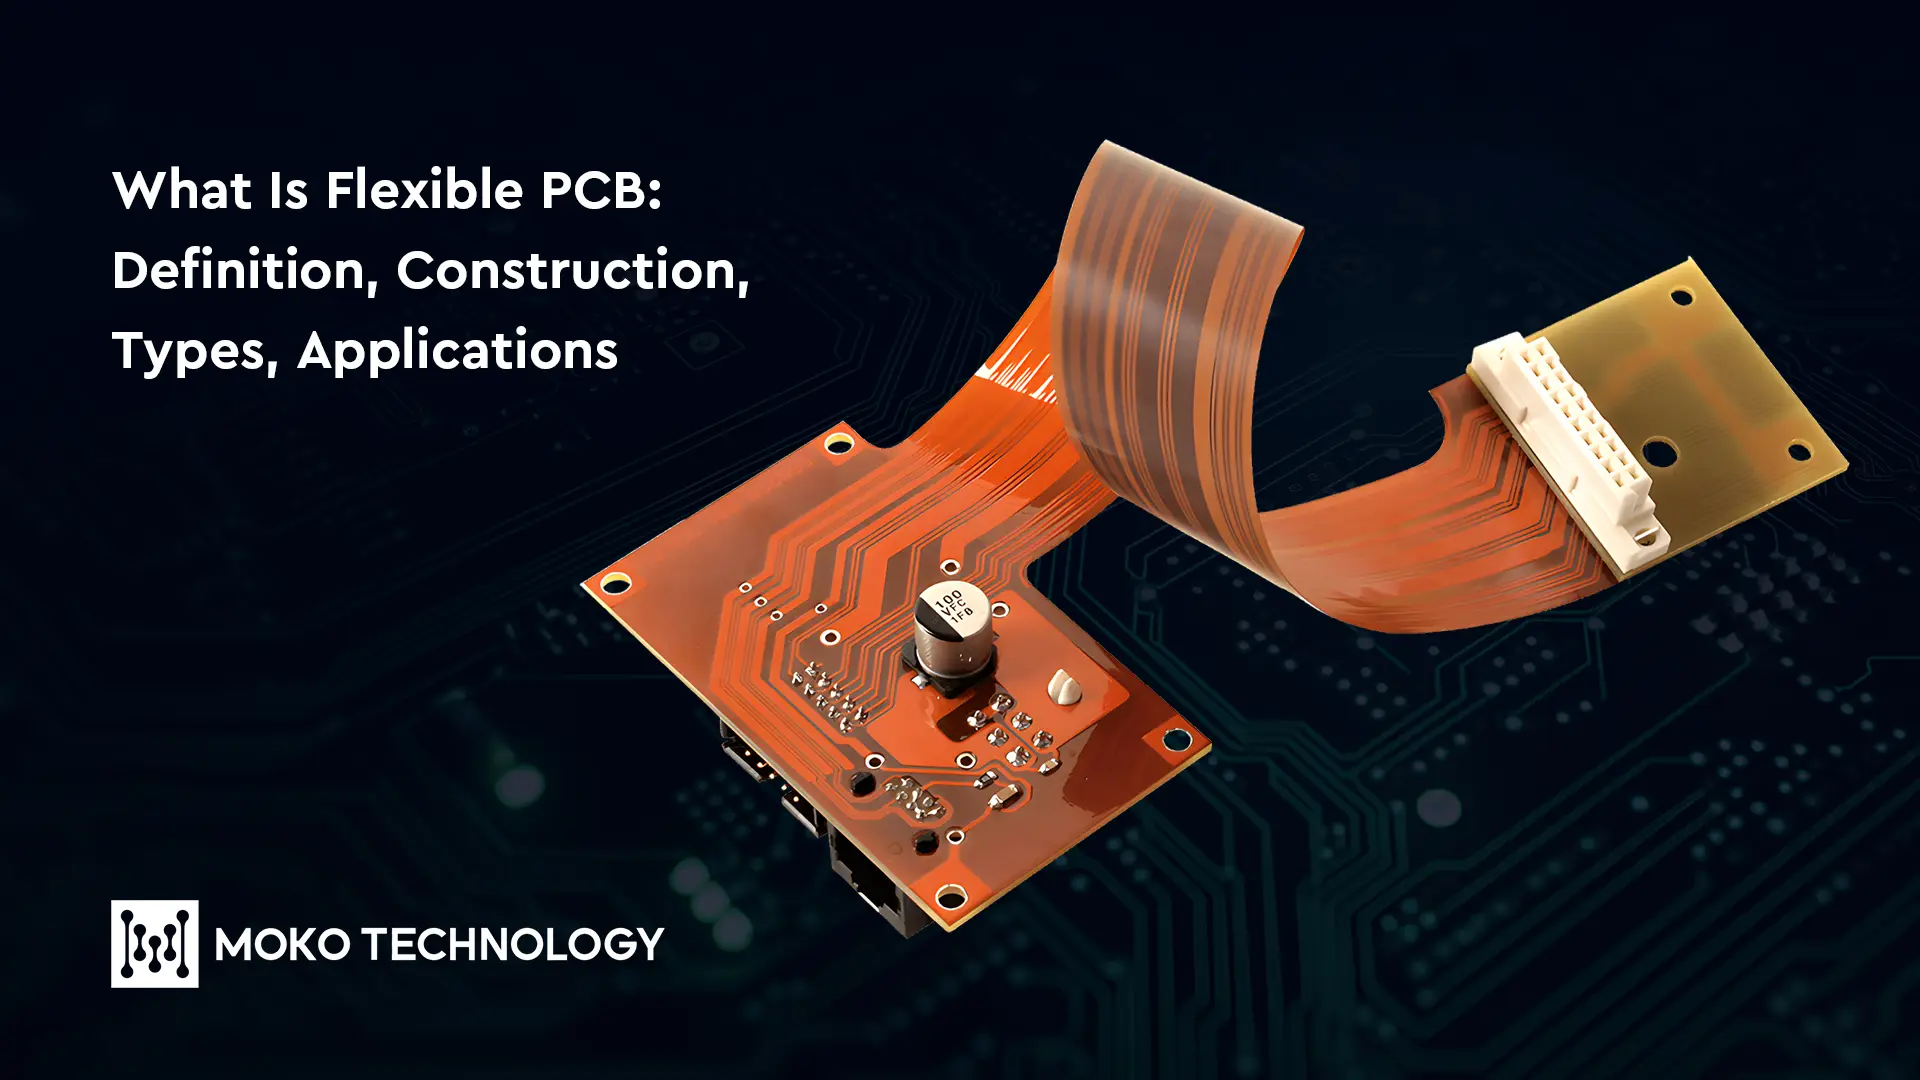 What Is Flexible PCB: Definition, Construction, Types, Applications